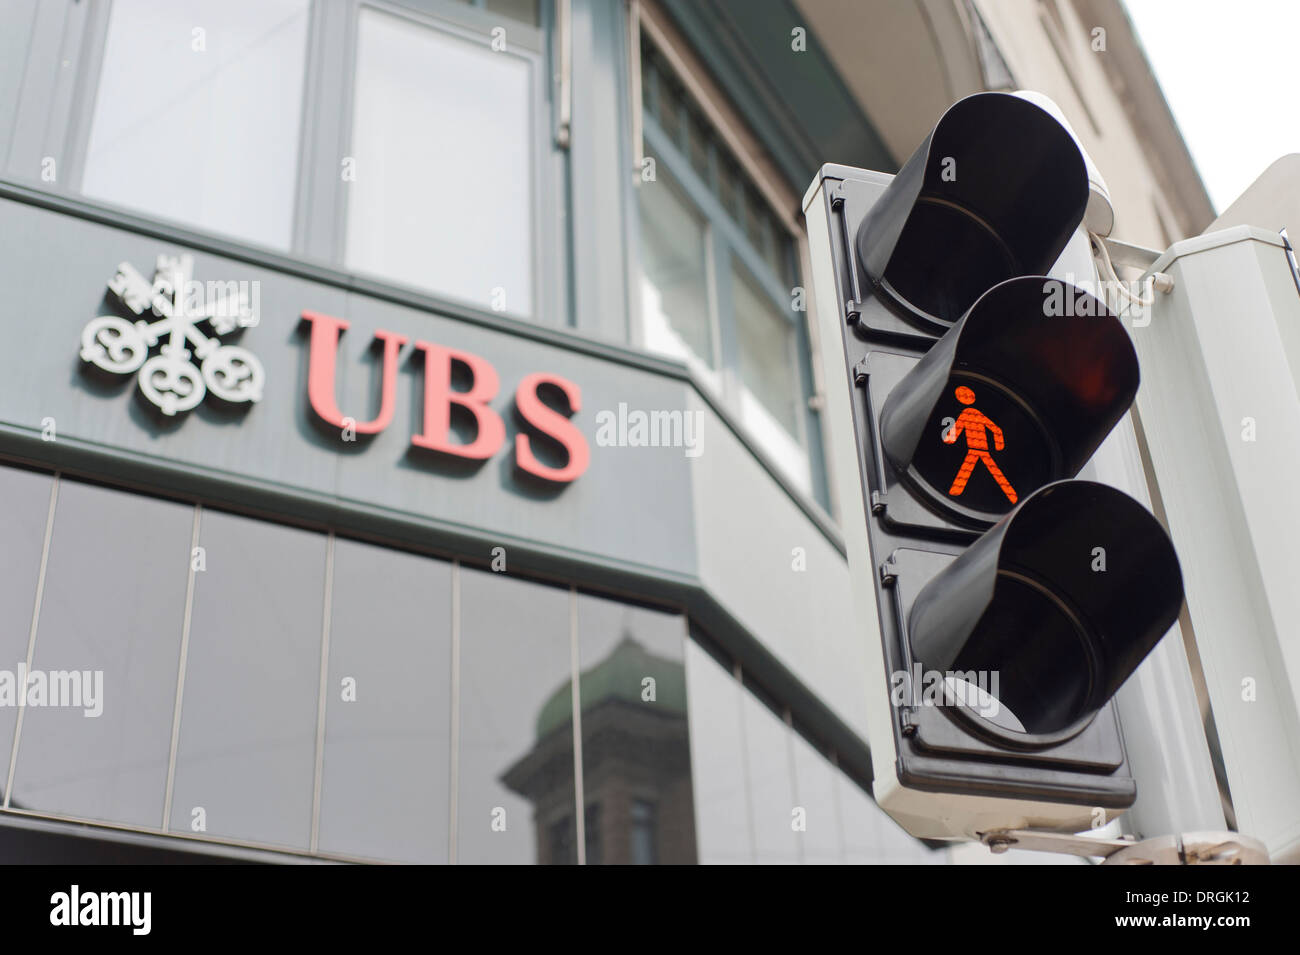 Entrance of UBS, Switzerland's largest bank, on Bahnhofstrsse in Zurich city. Stock Photo